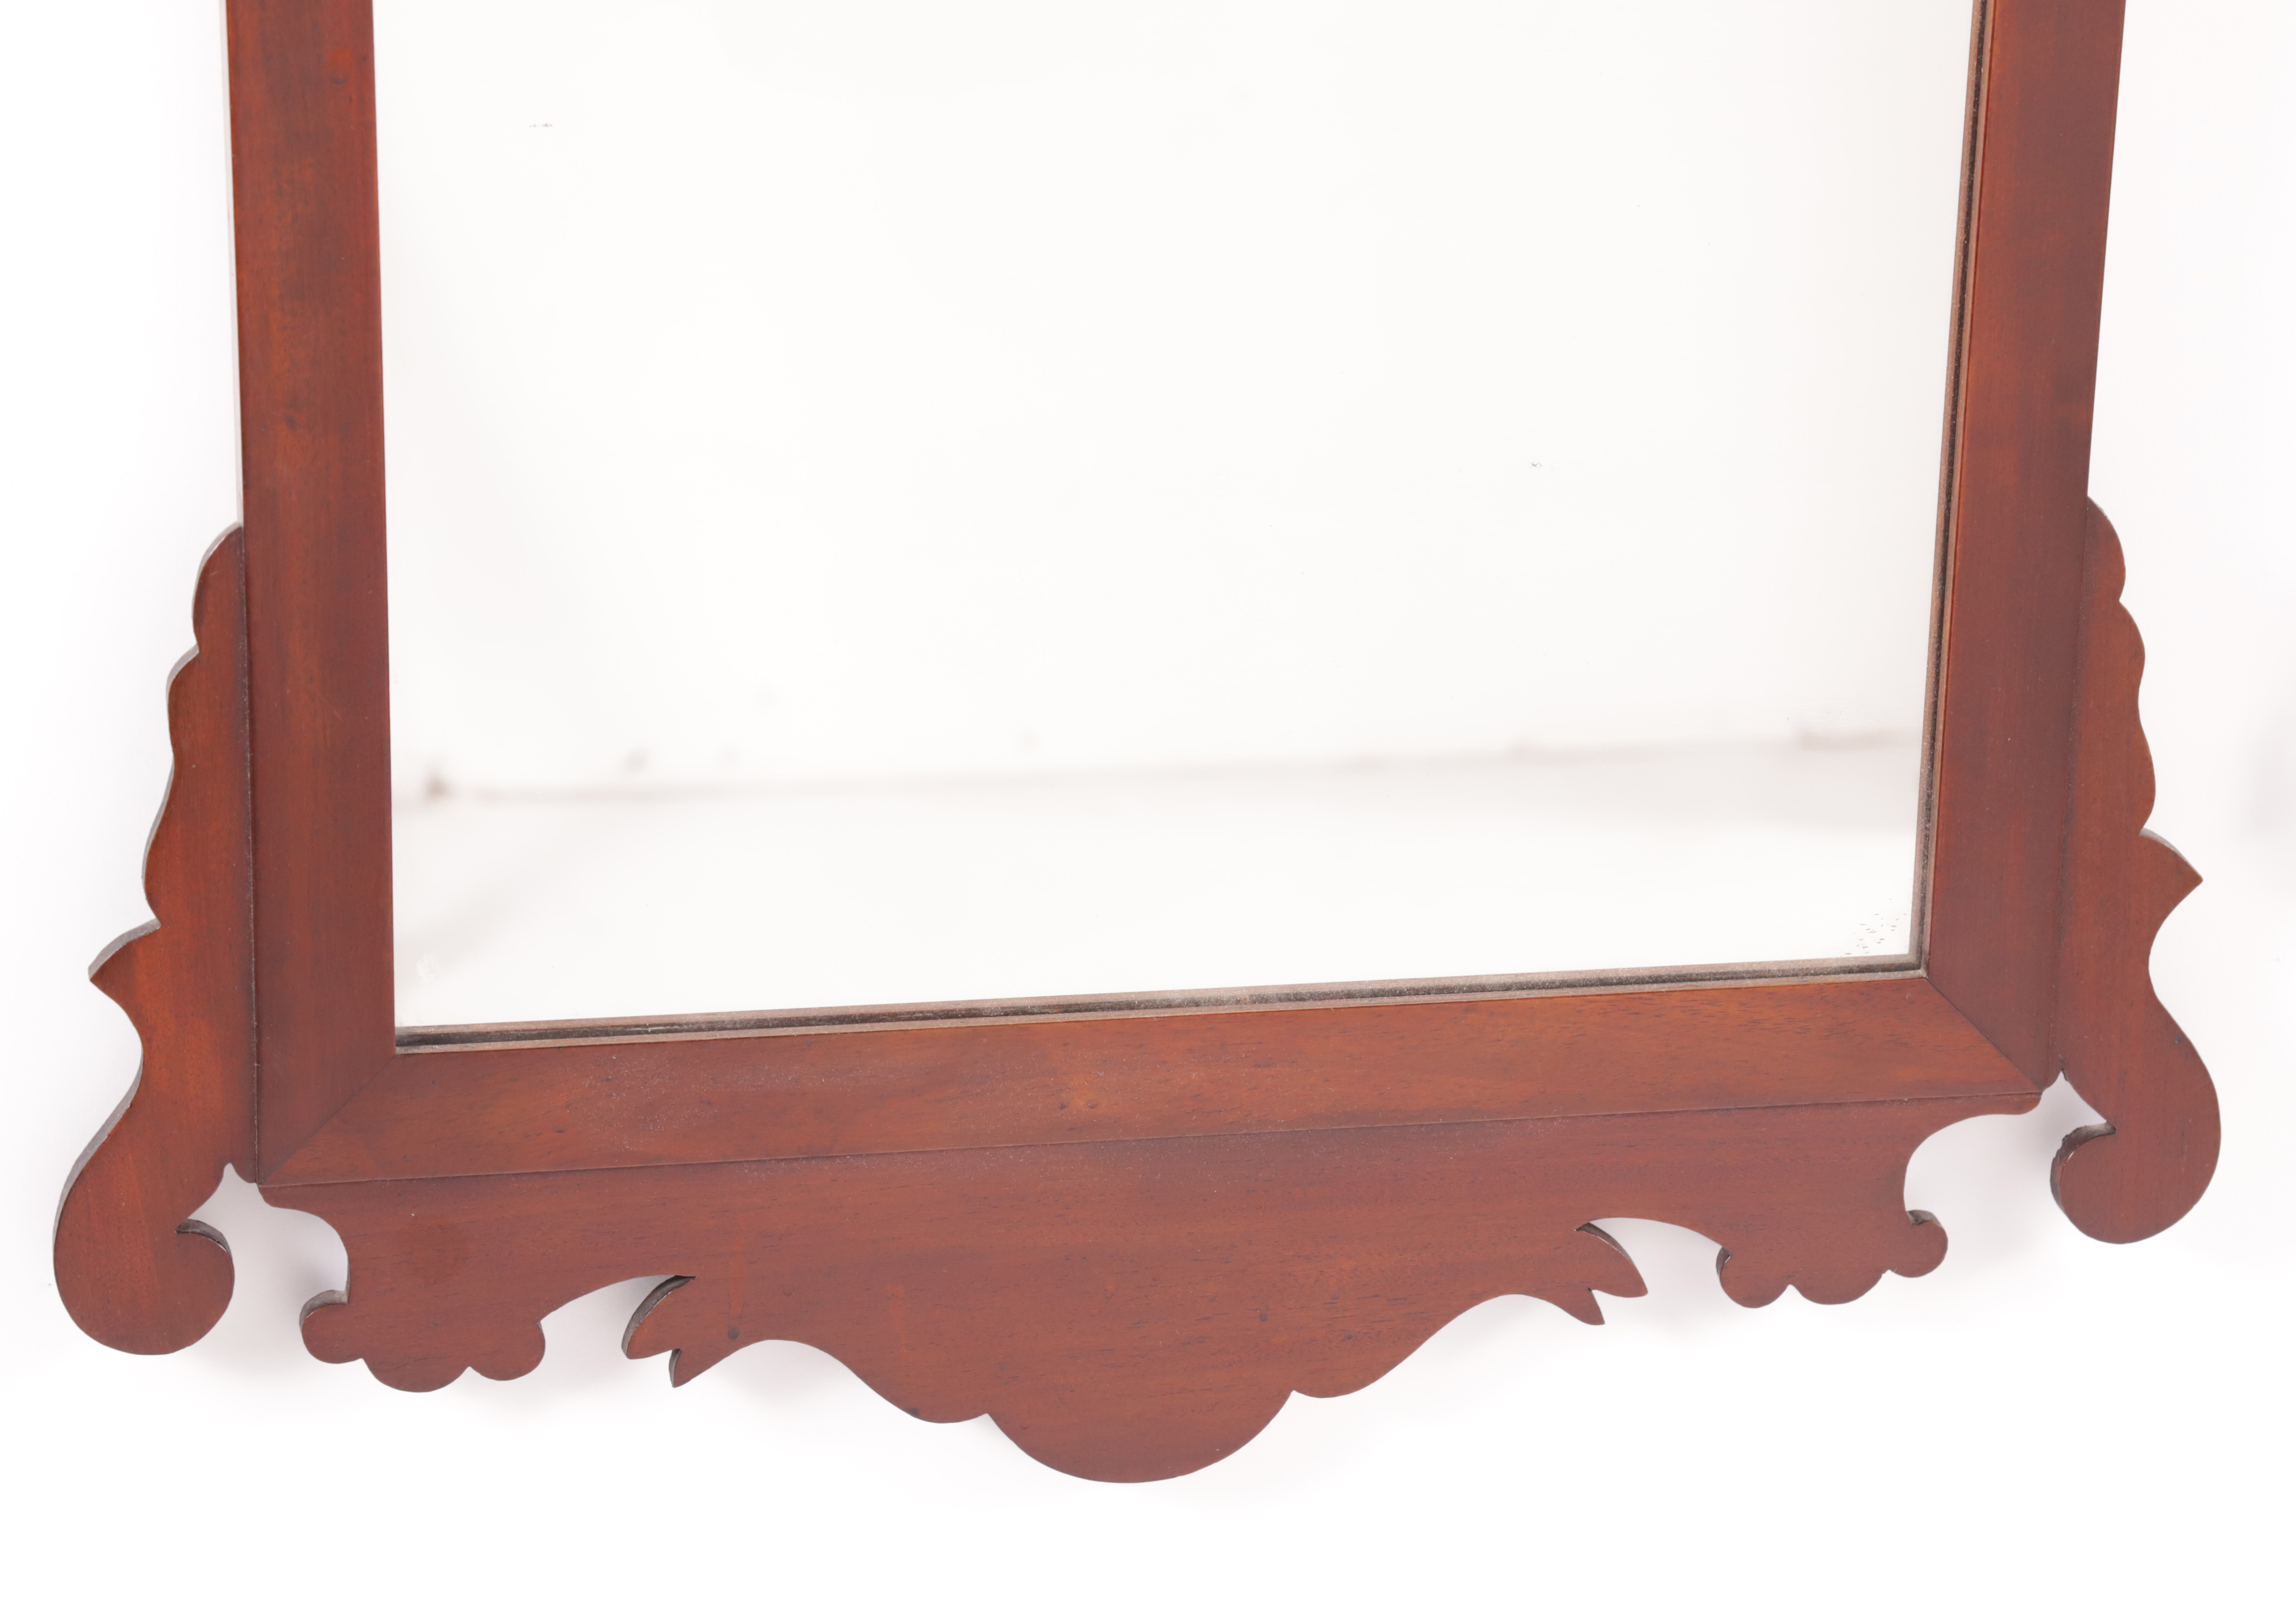 Two Chippendale Mahogany Mirrors, One Early 19th Century